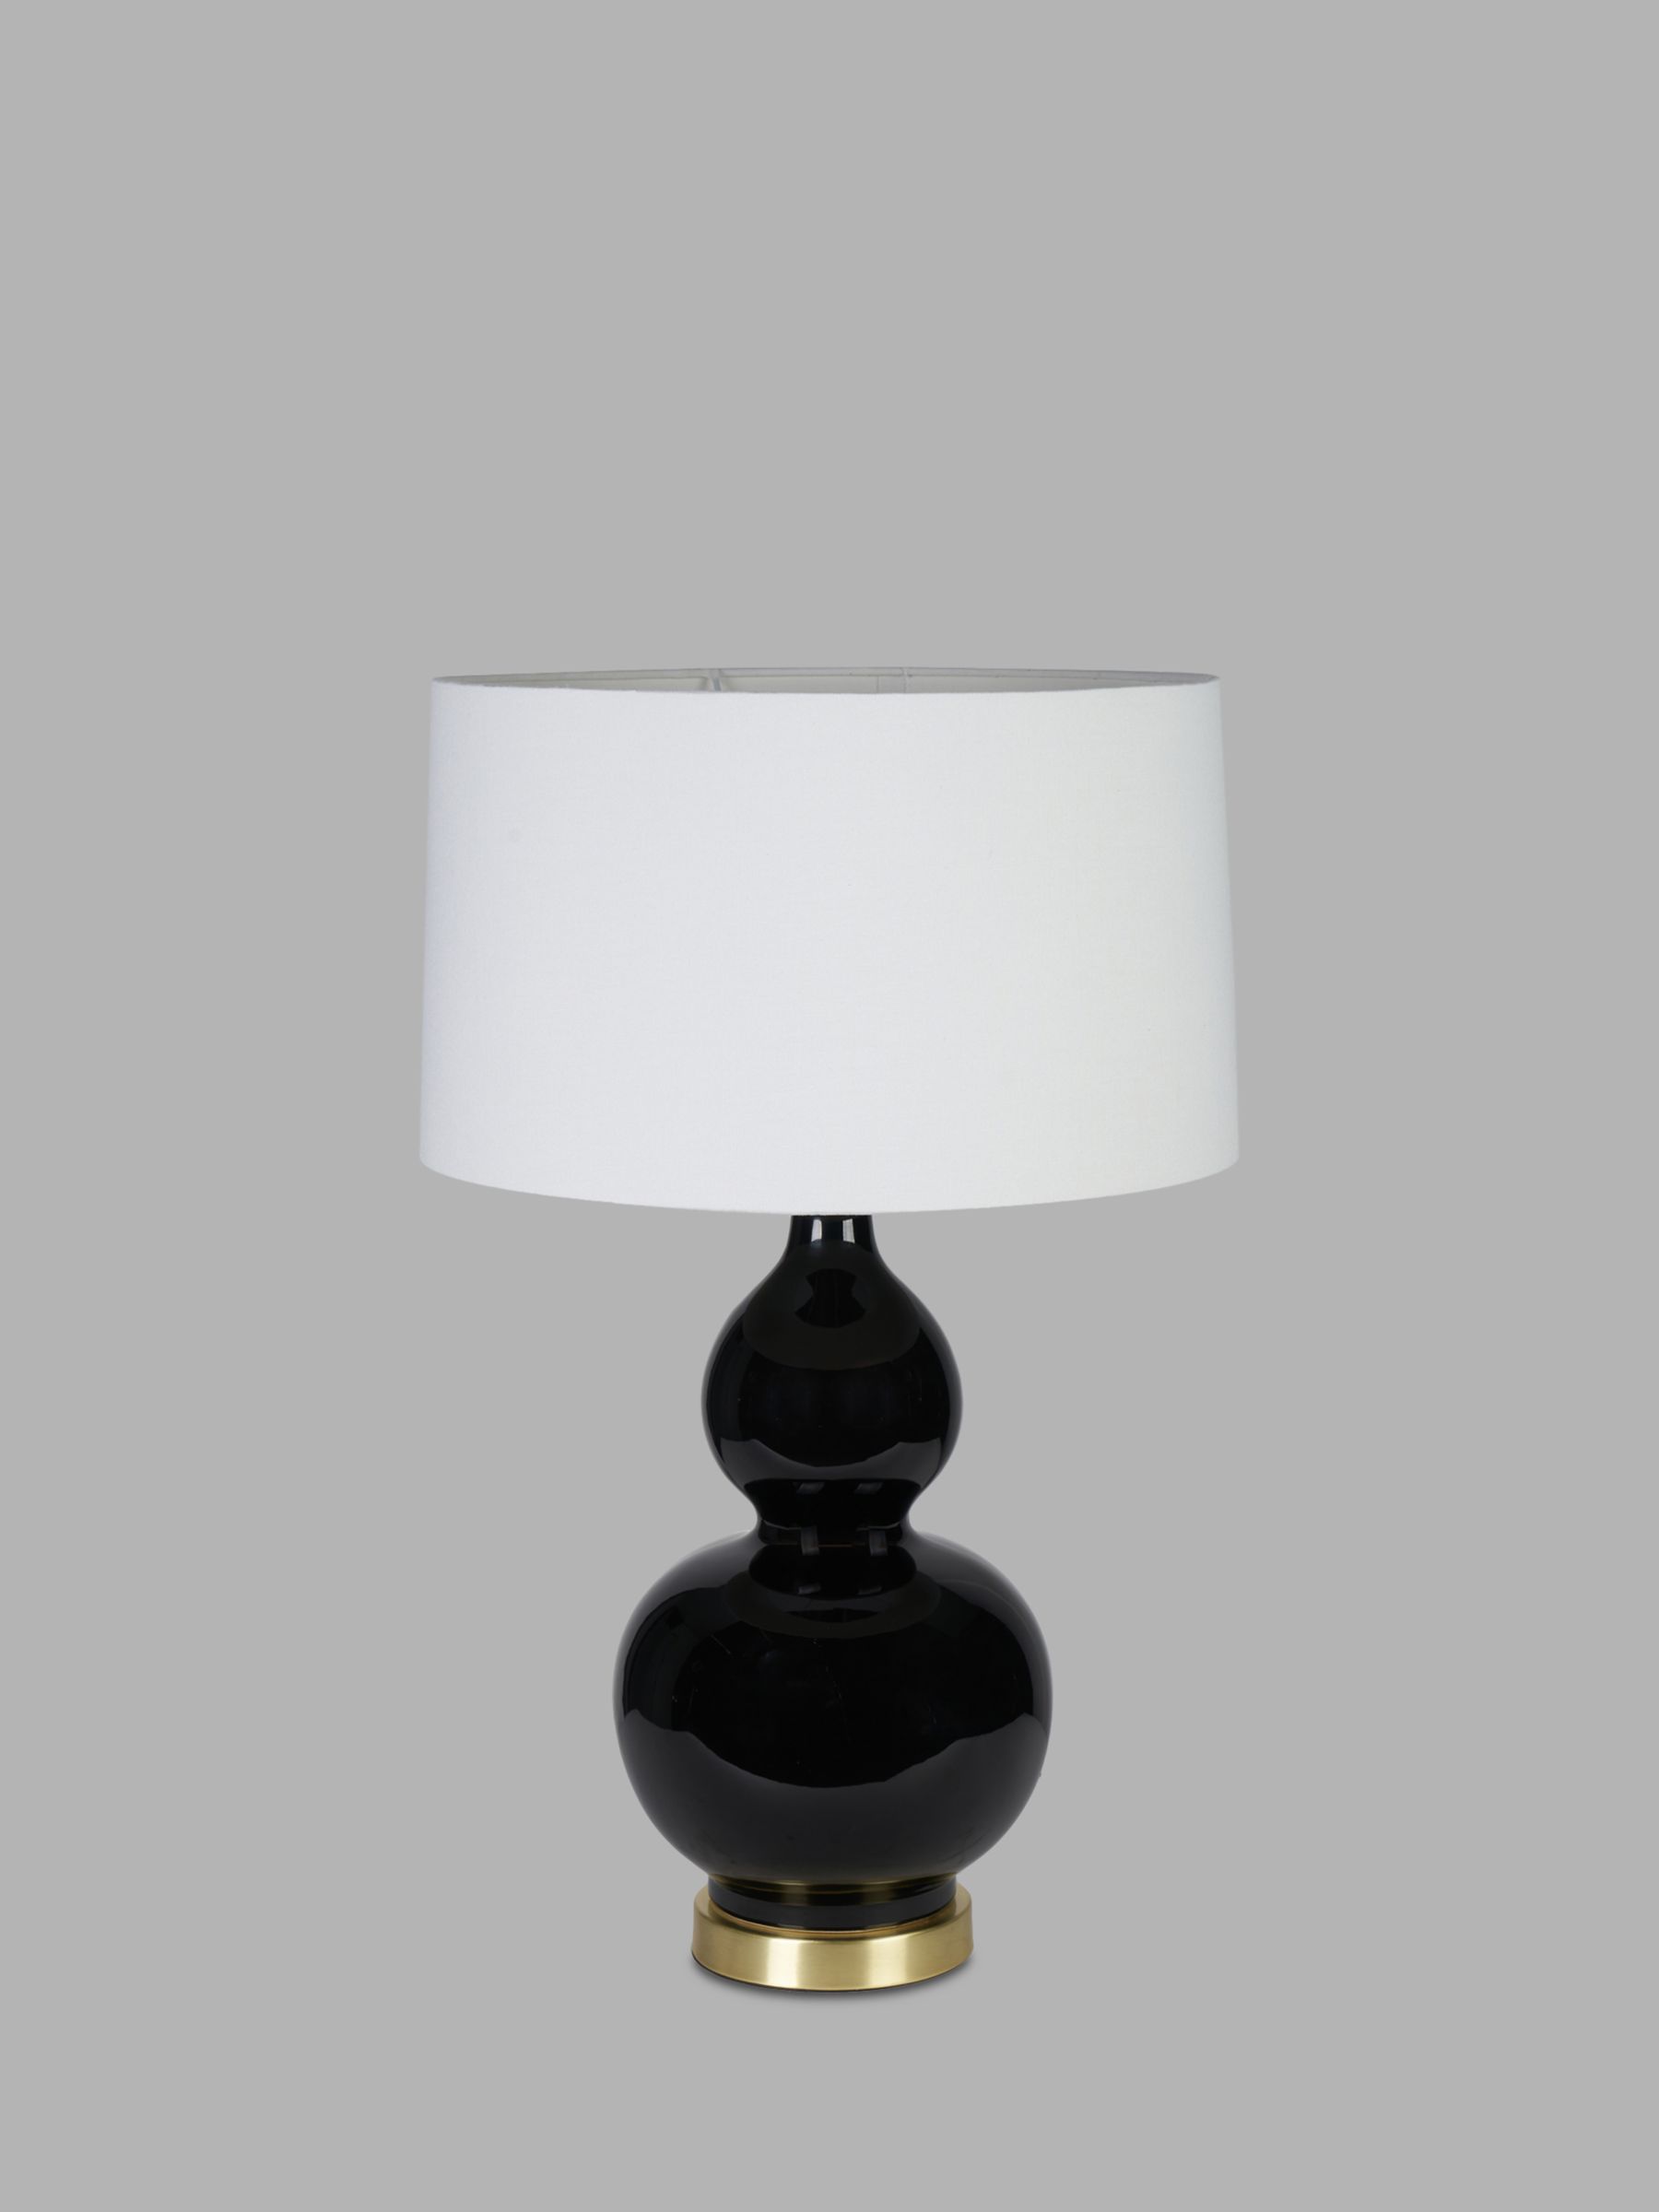 Photo of Pacific lifestyle gatsby glazed table lamp